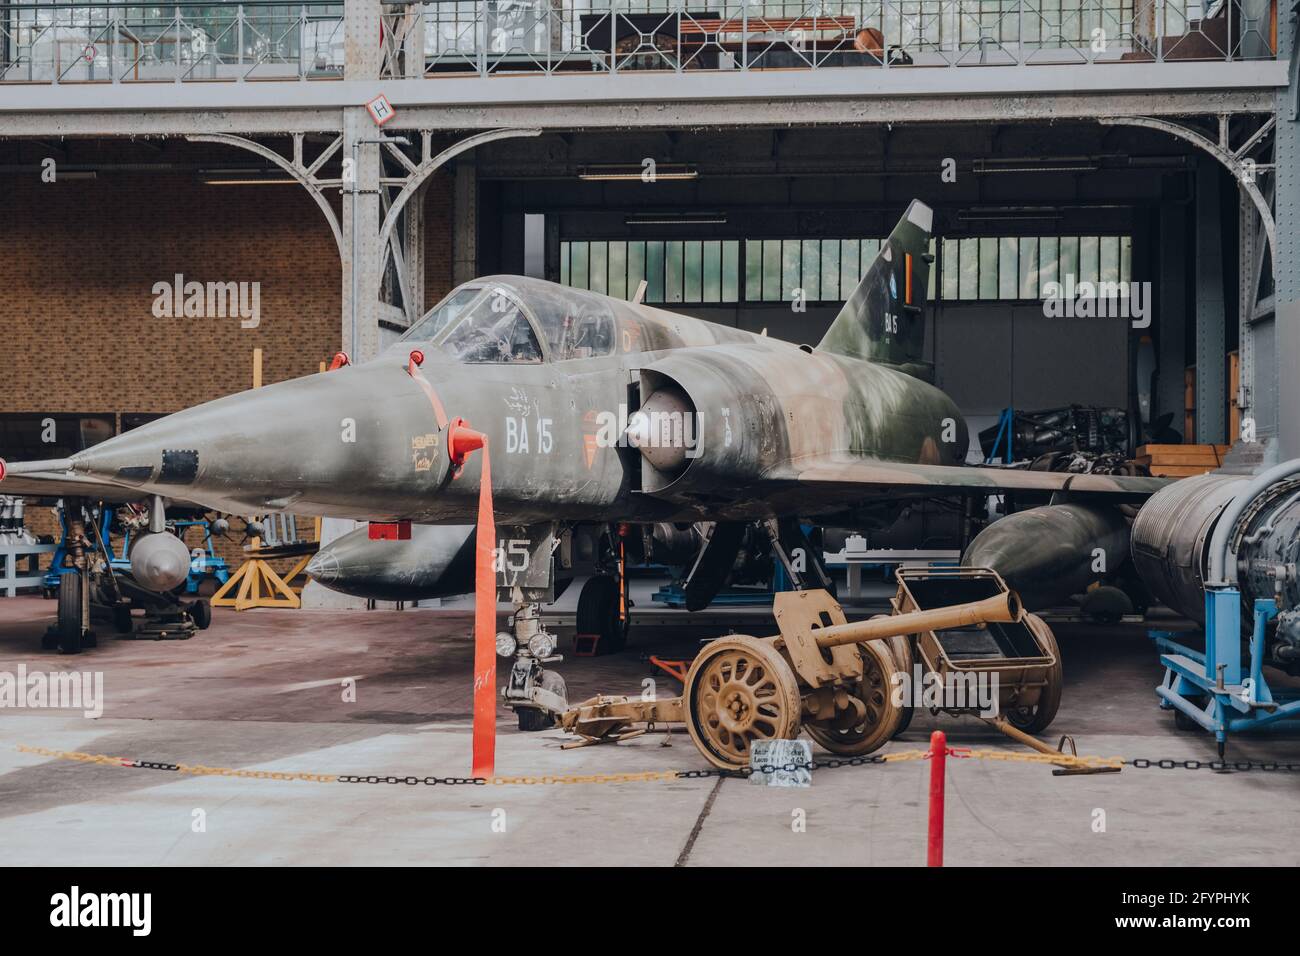 Brussels, Belgium - August 17, 2019: The Lockheed F-104 Starfighter supersonic aircraft inside The Royal Museum of the Armed Forces and Military Histo Stock Photo